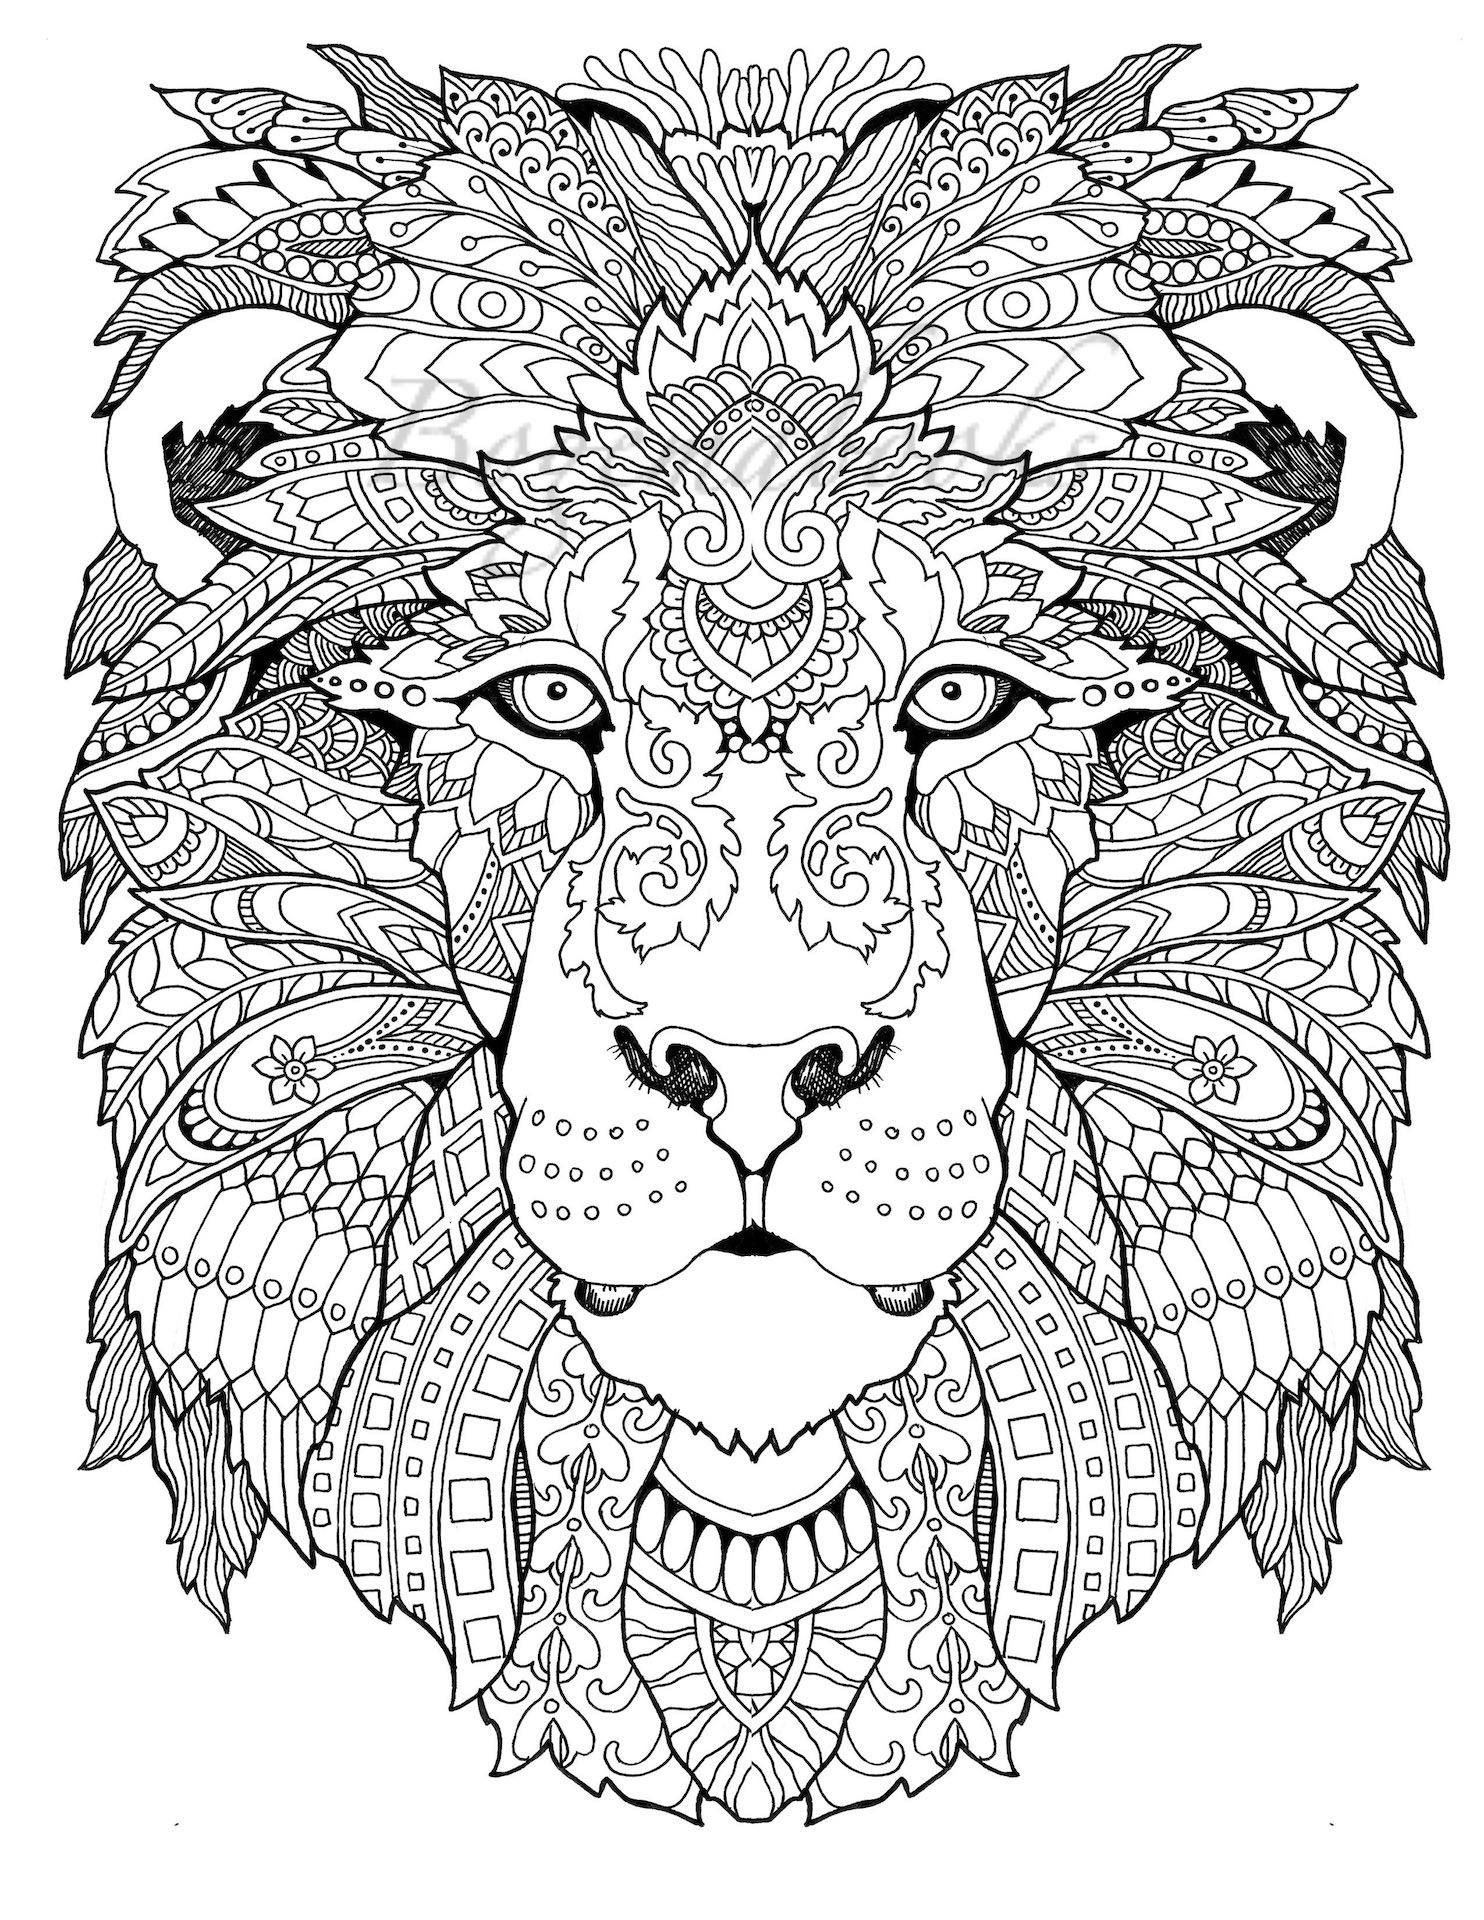 Awesome Animals Adult Coloring Book Coloring Pages Pdf | Awesome - Free Printable Coloring Book Pages For Adults